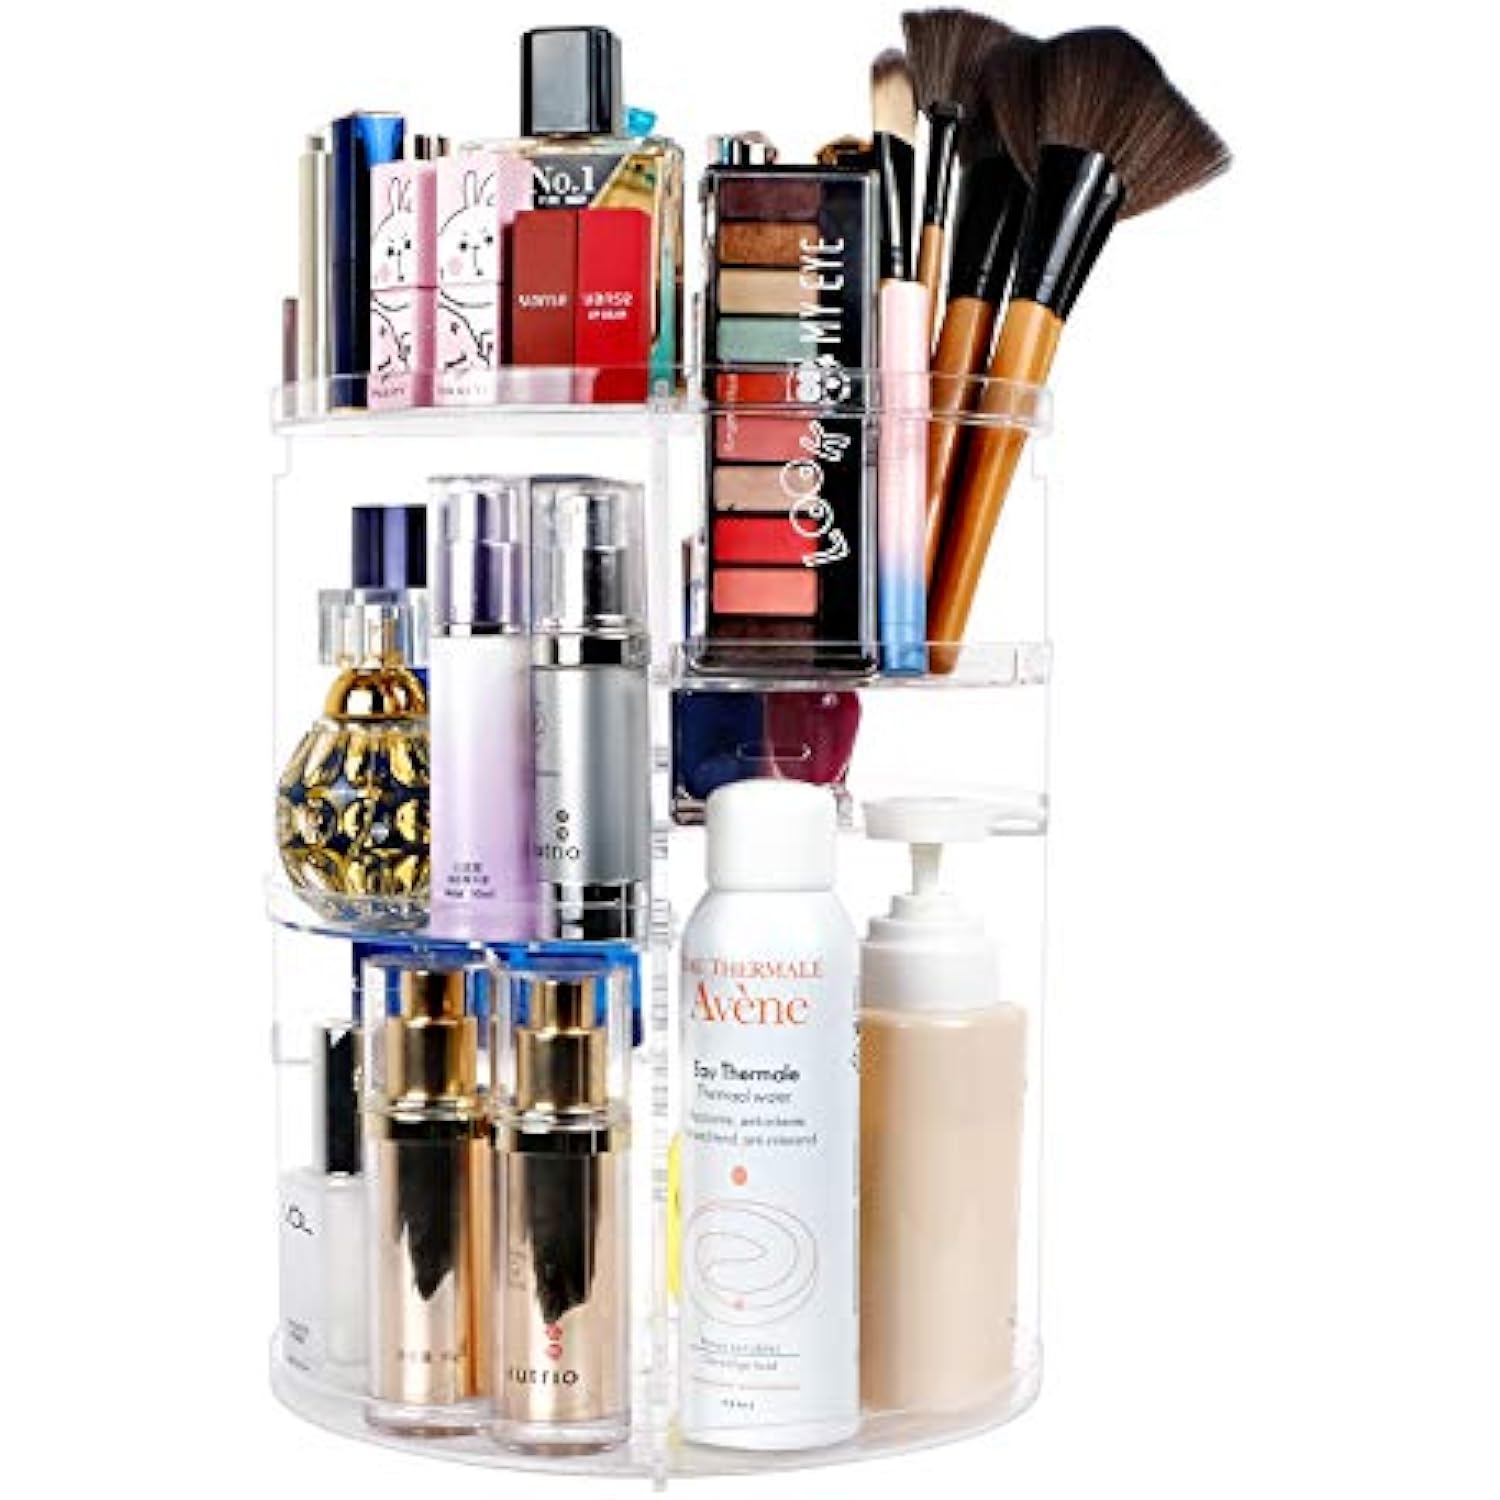 DIY Detachable Spinning Cosmetic Makeup Caddy Storage – BlessMyBucket